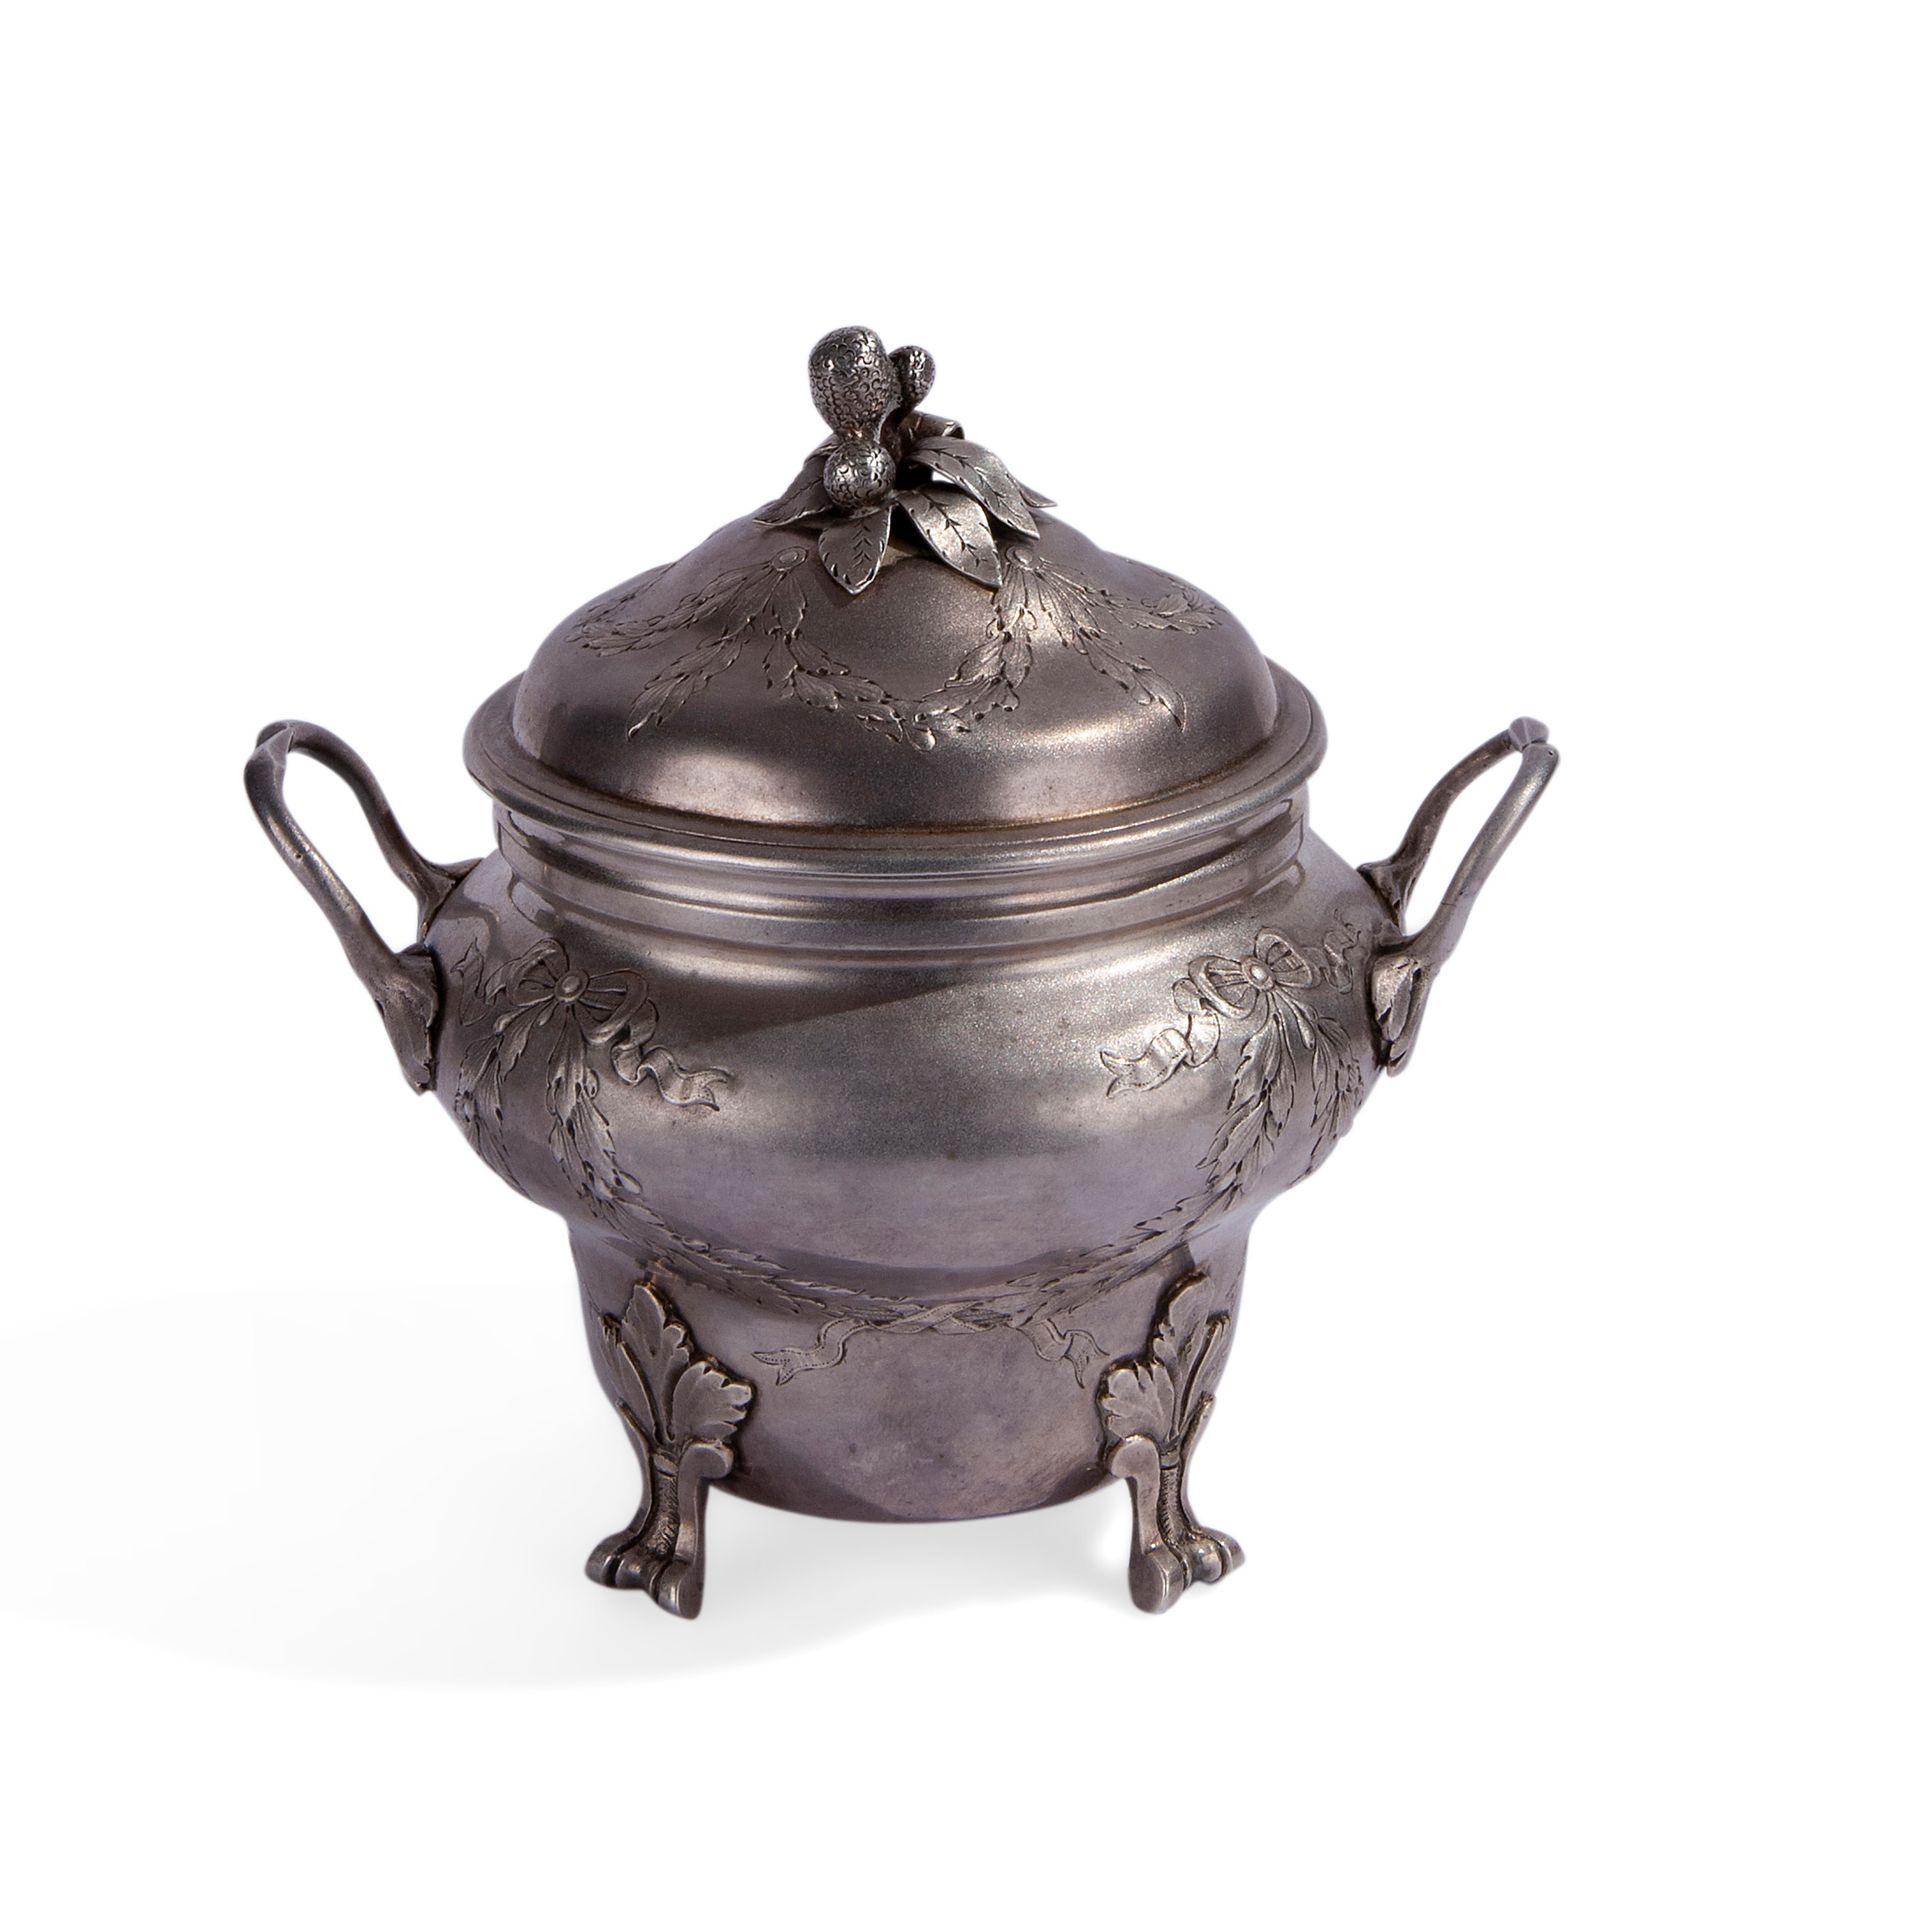 Embossed and chiseled silver sugar bowl, France late 18th century Azucarero de p&hellip;